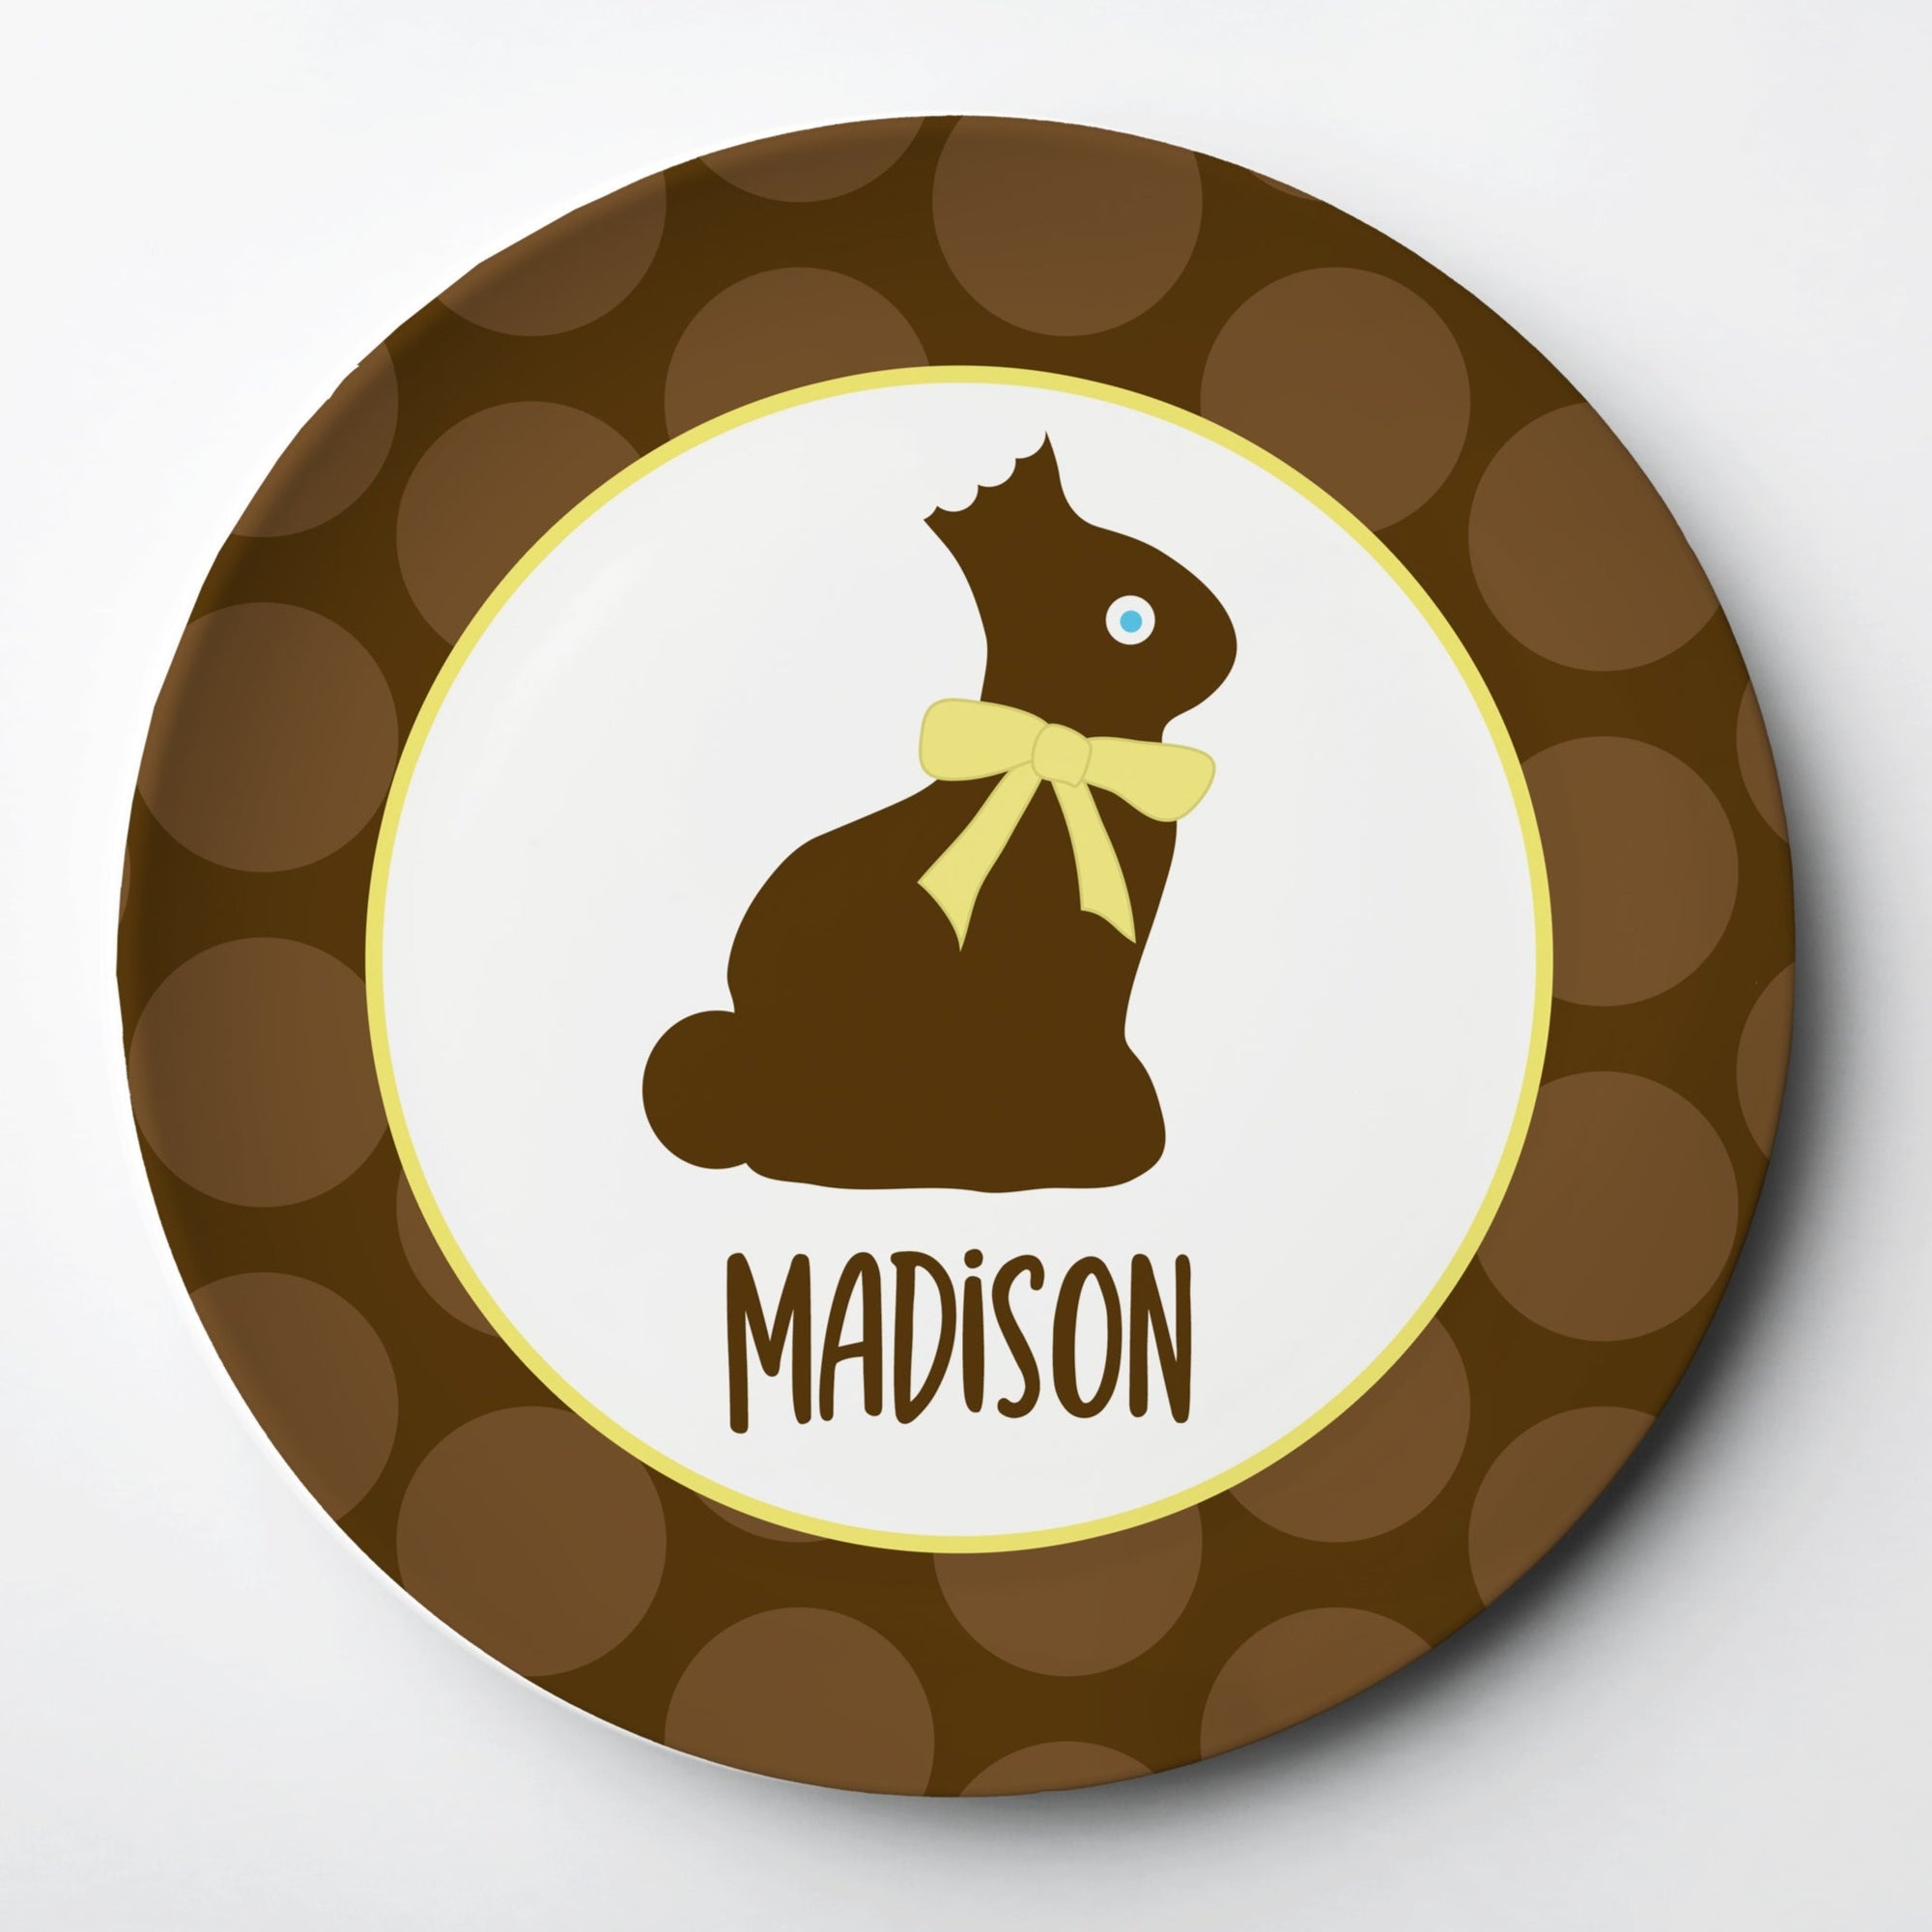 Chocolate Easter Bunny Personalized Kids Plate, Reusable, Thick polymer plastic will last for years